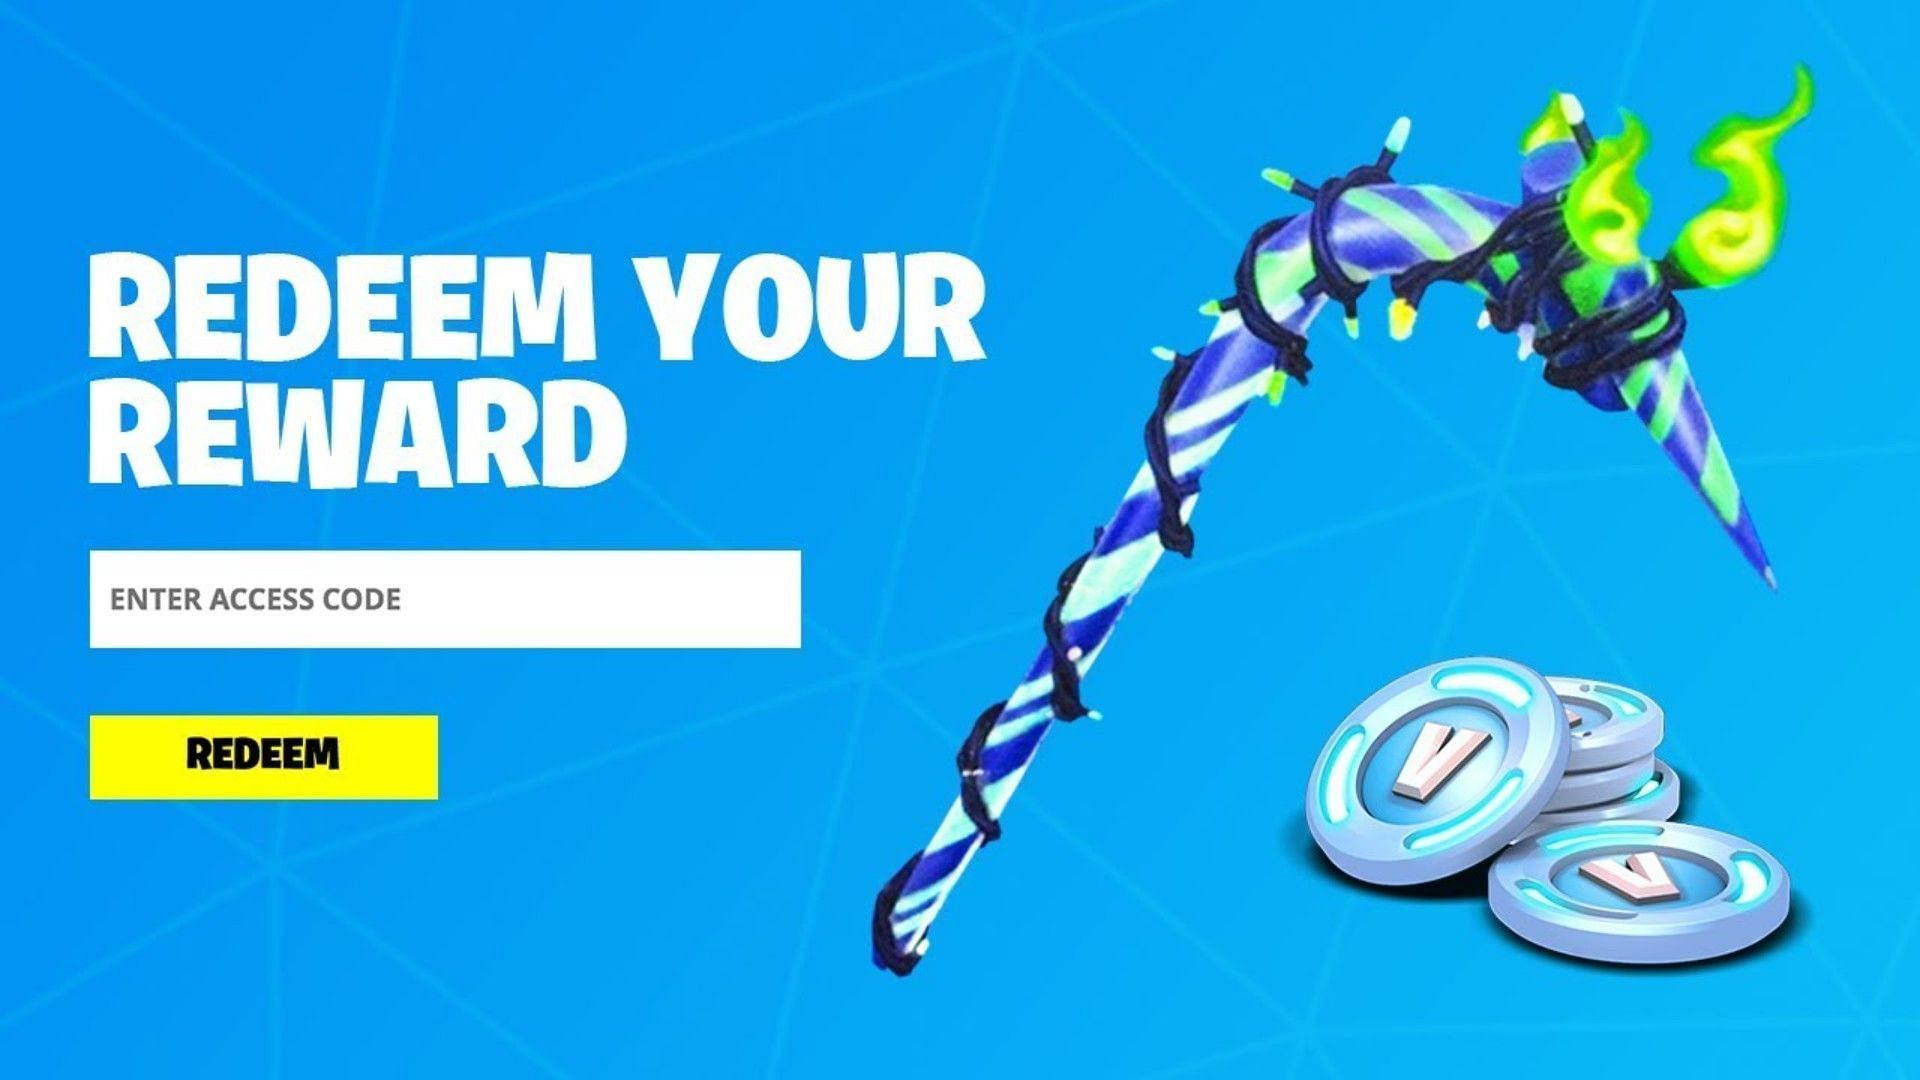 Can you still get the Minty Pickaxe in Fortnite as of 2022?